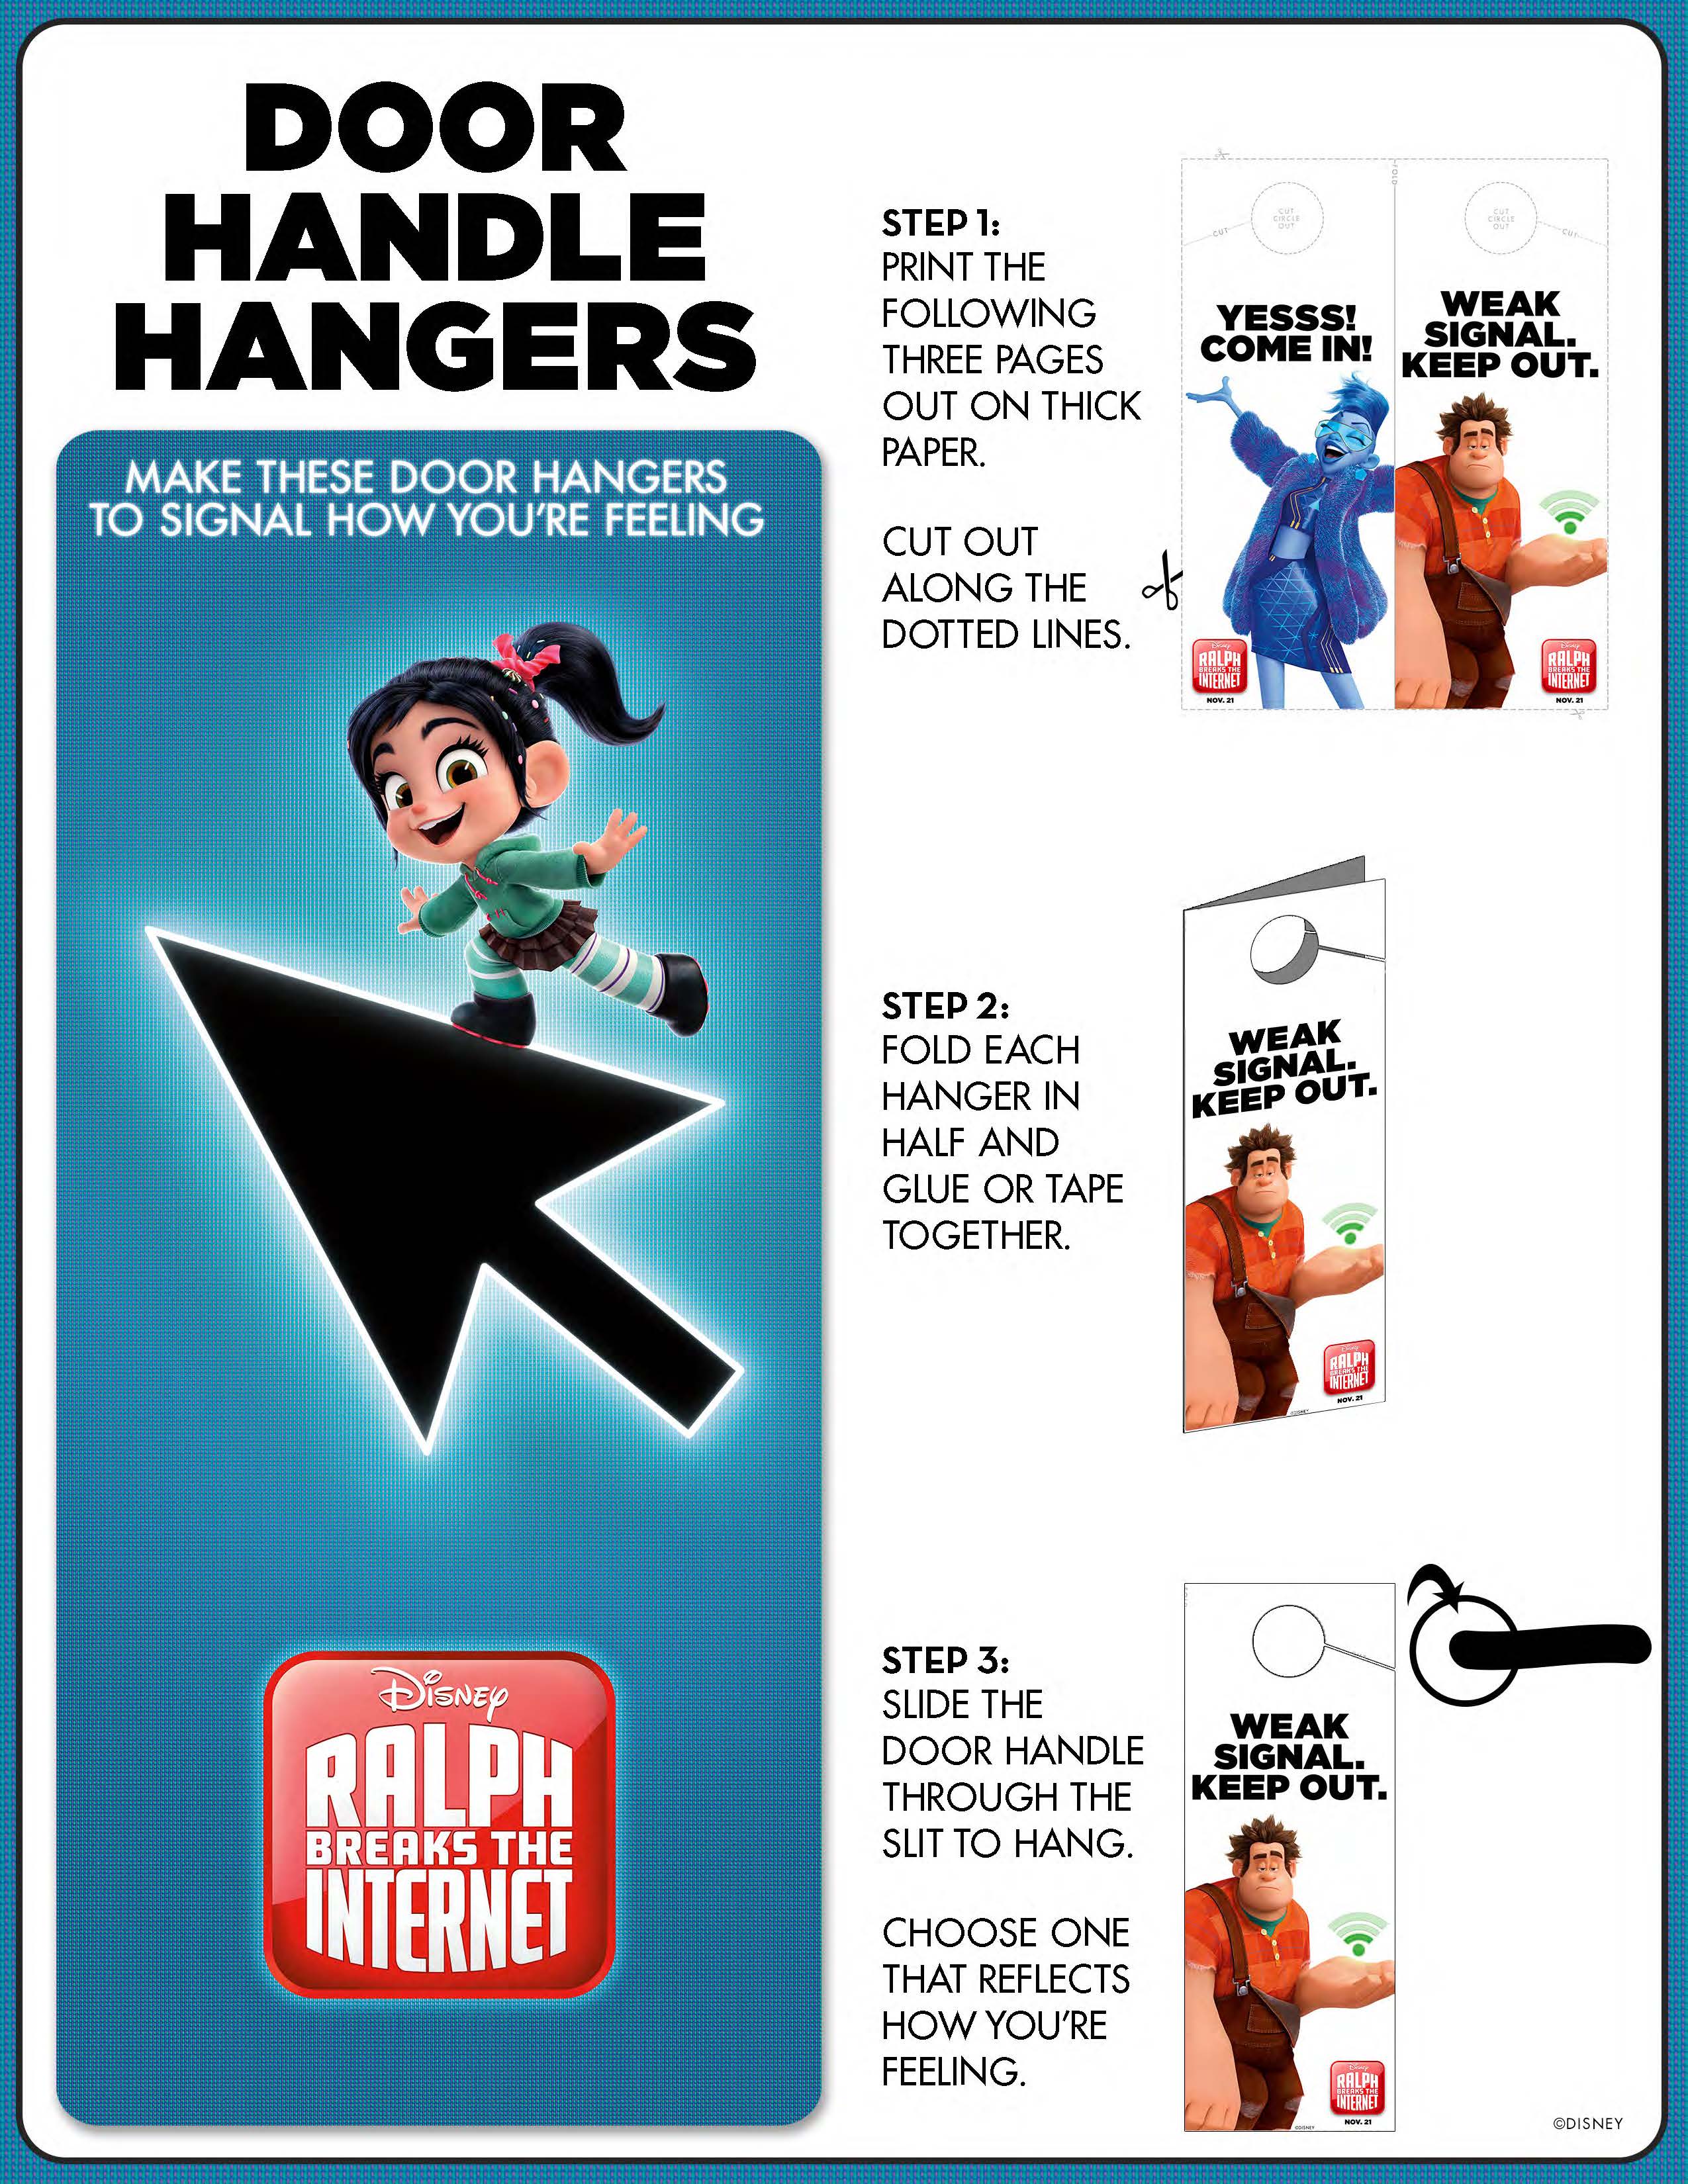 Ralph Breaks the Internet Printable and Coloring Pages. Free pages from the 2nd Wreck-it Ralph movie. #printable #freeprintable #disney